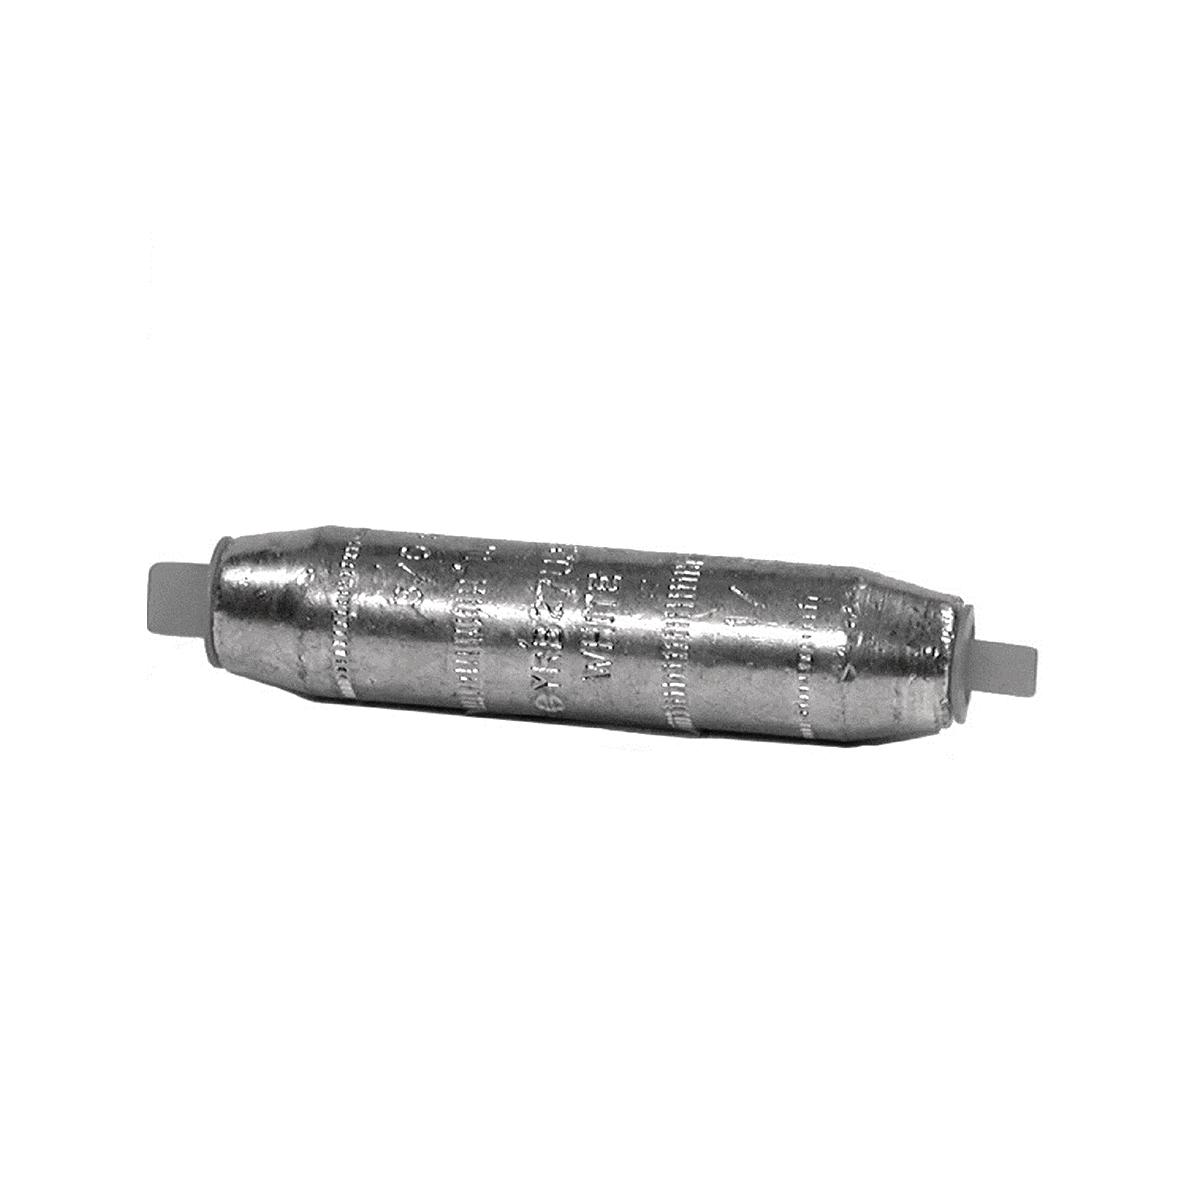 Hubbell YRB34U25 Aluminum Electro tin plated reducer. 